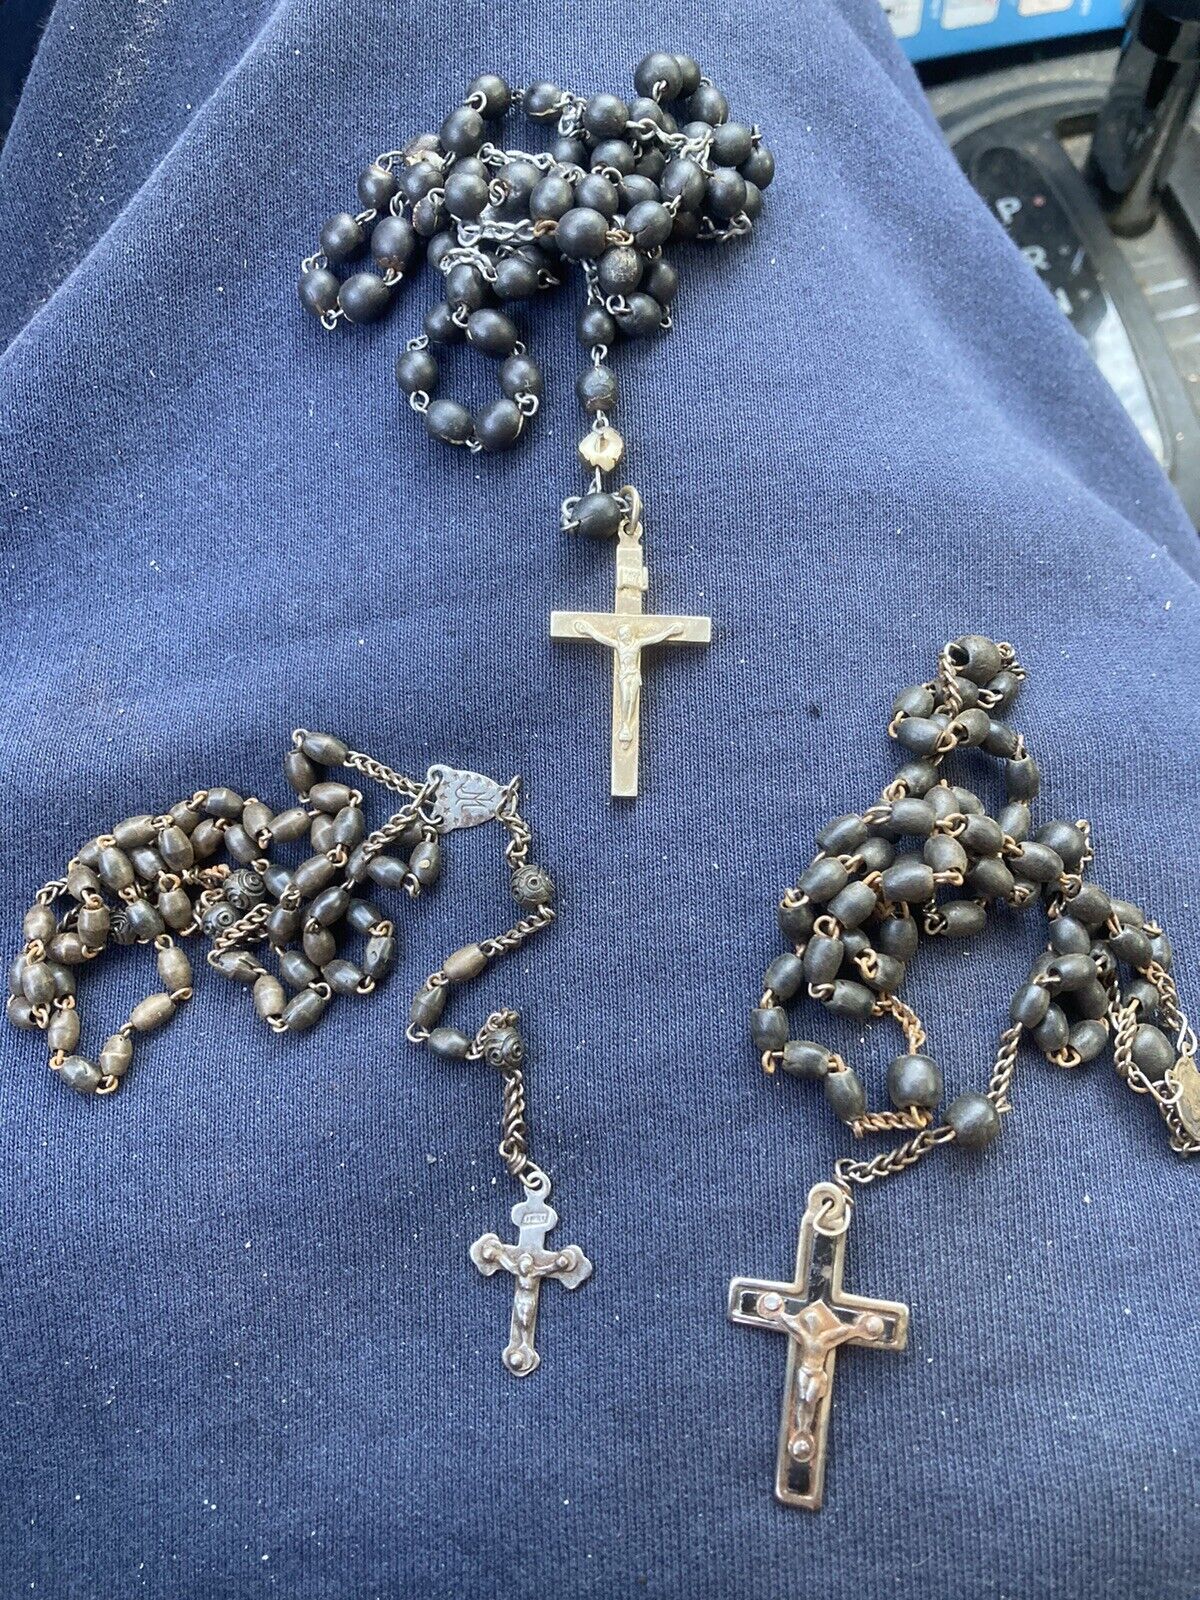 3 Early 20th C Rosaries France Ebony Beads One has Carved beads & Early Crucifix